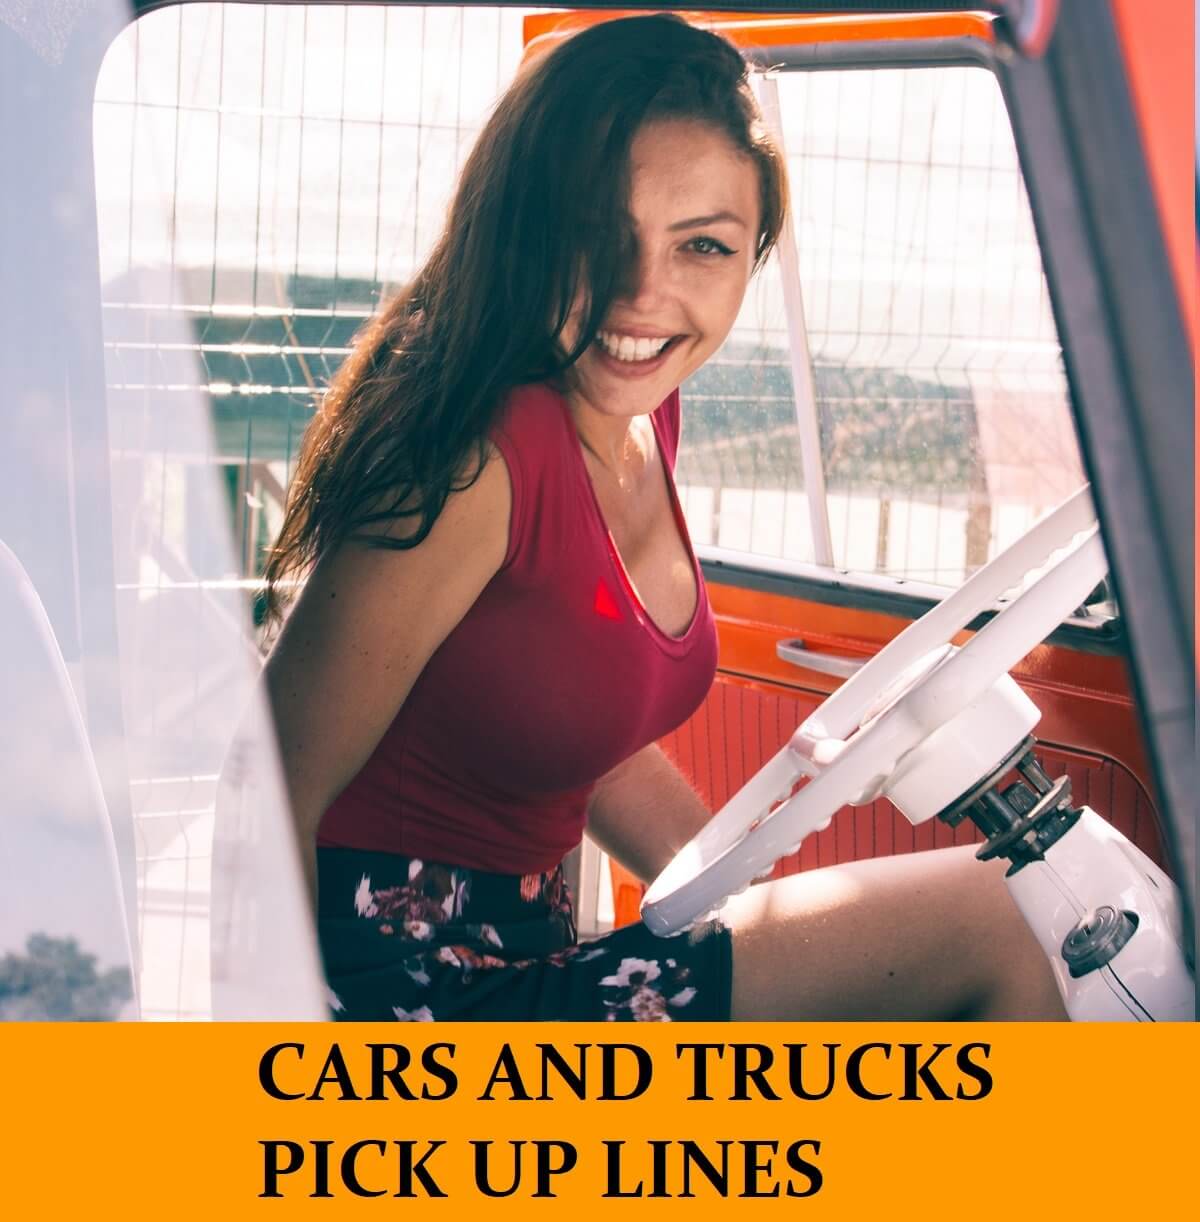 Pick Up Lines Based on Cars and Trucks